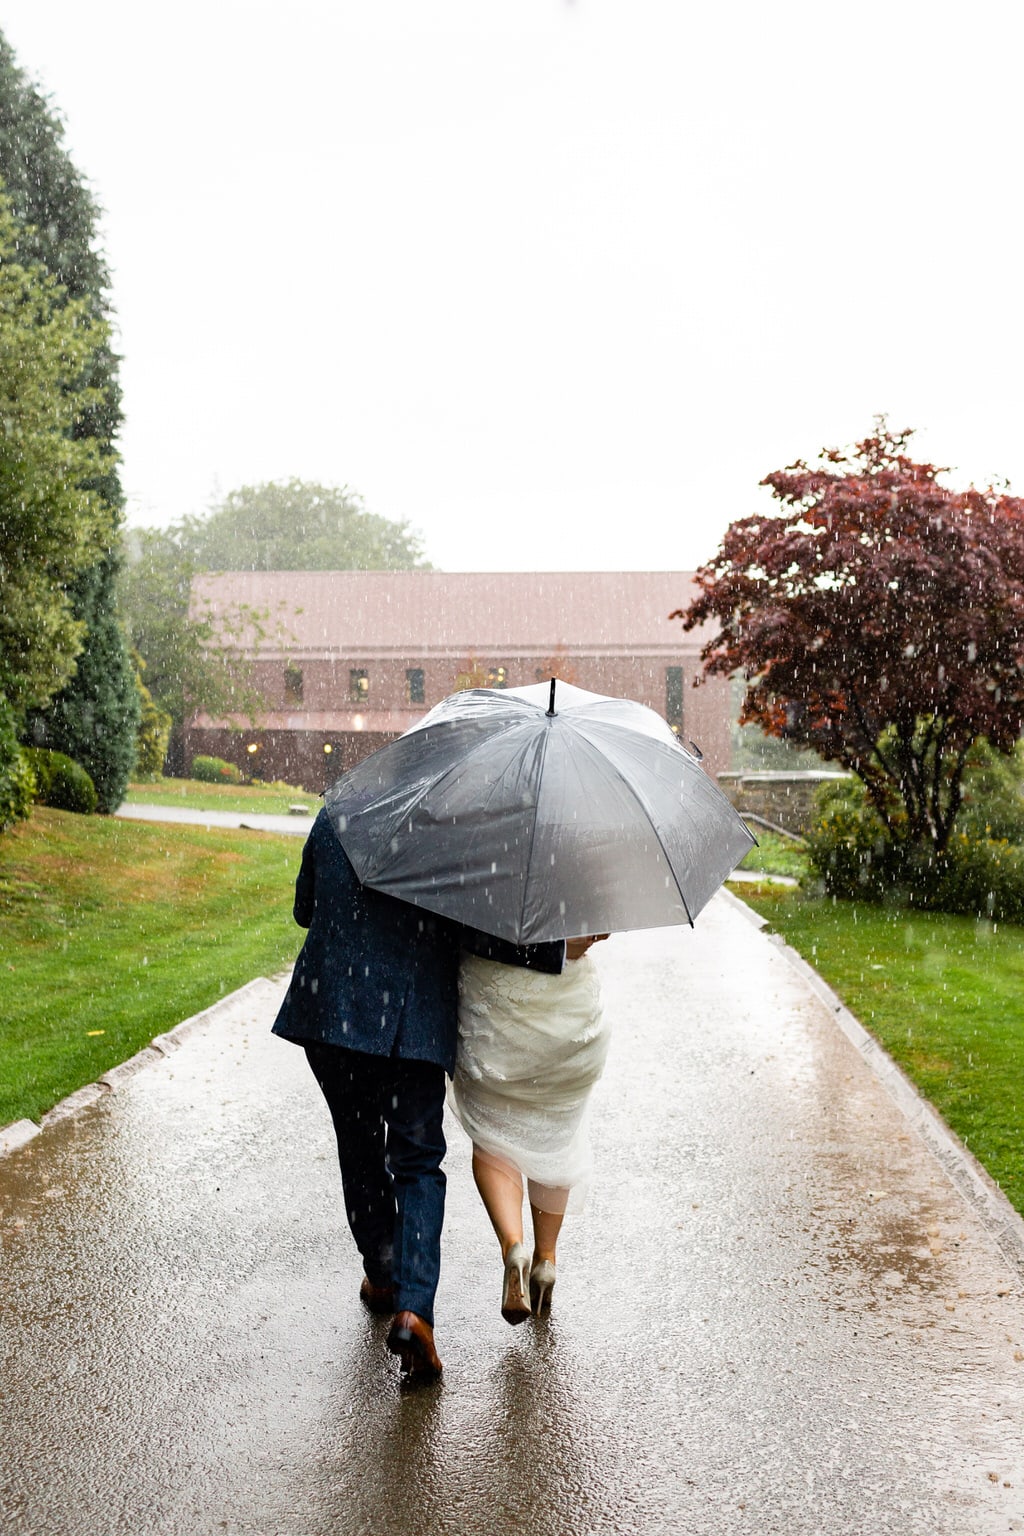 Foxtail Barns wedding photography; Bride and Groom walking in the rain with umbrella